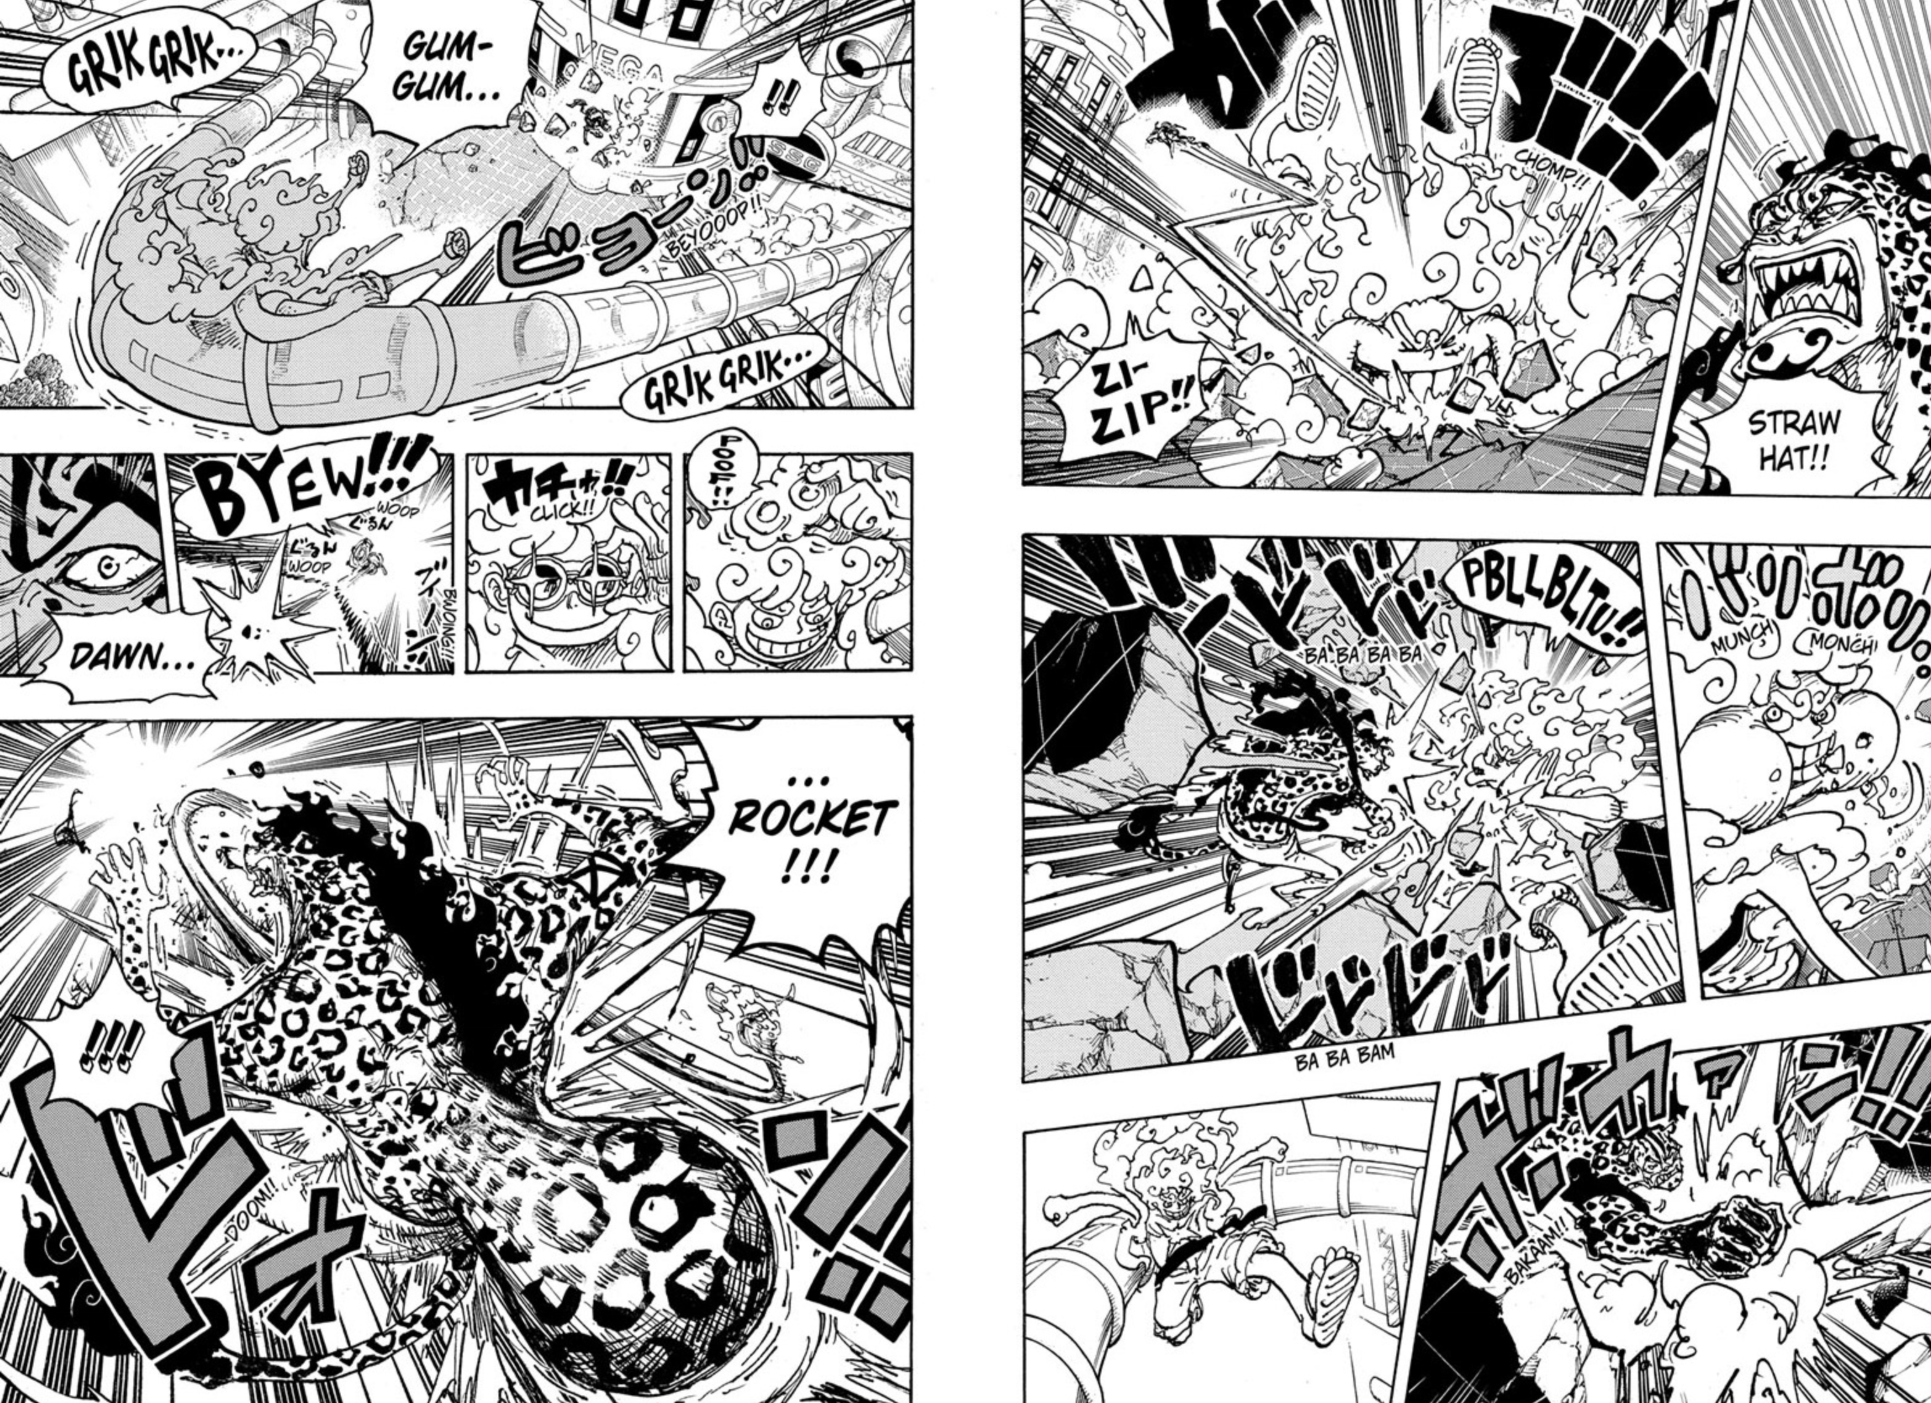 One Piece Chapter 1070 Pages 10-11